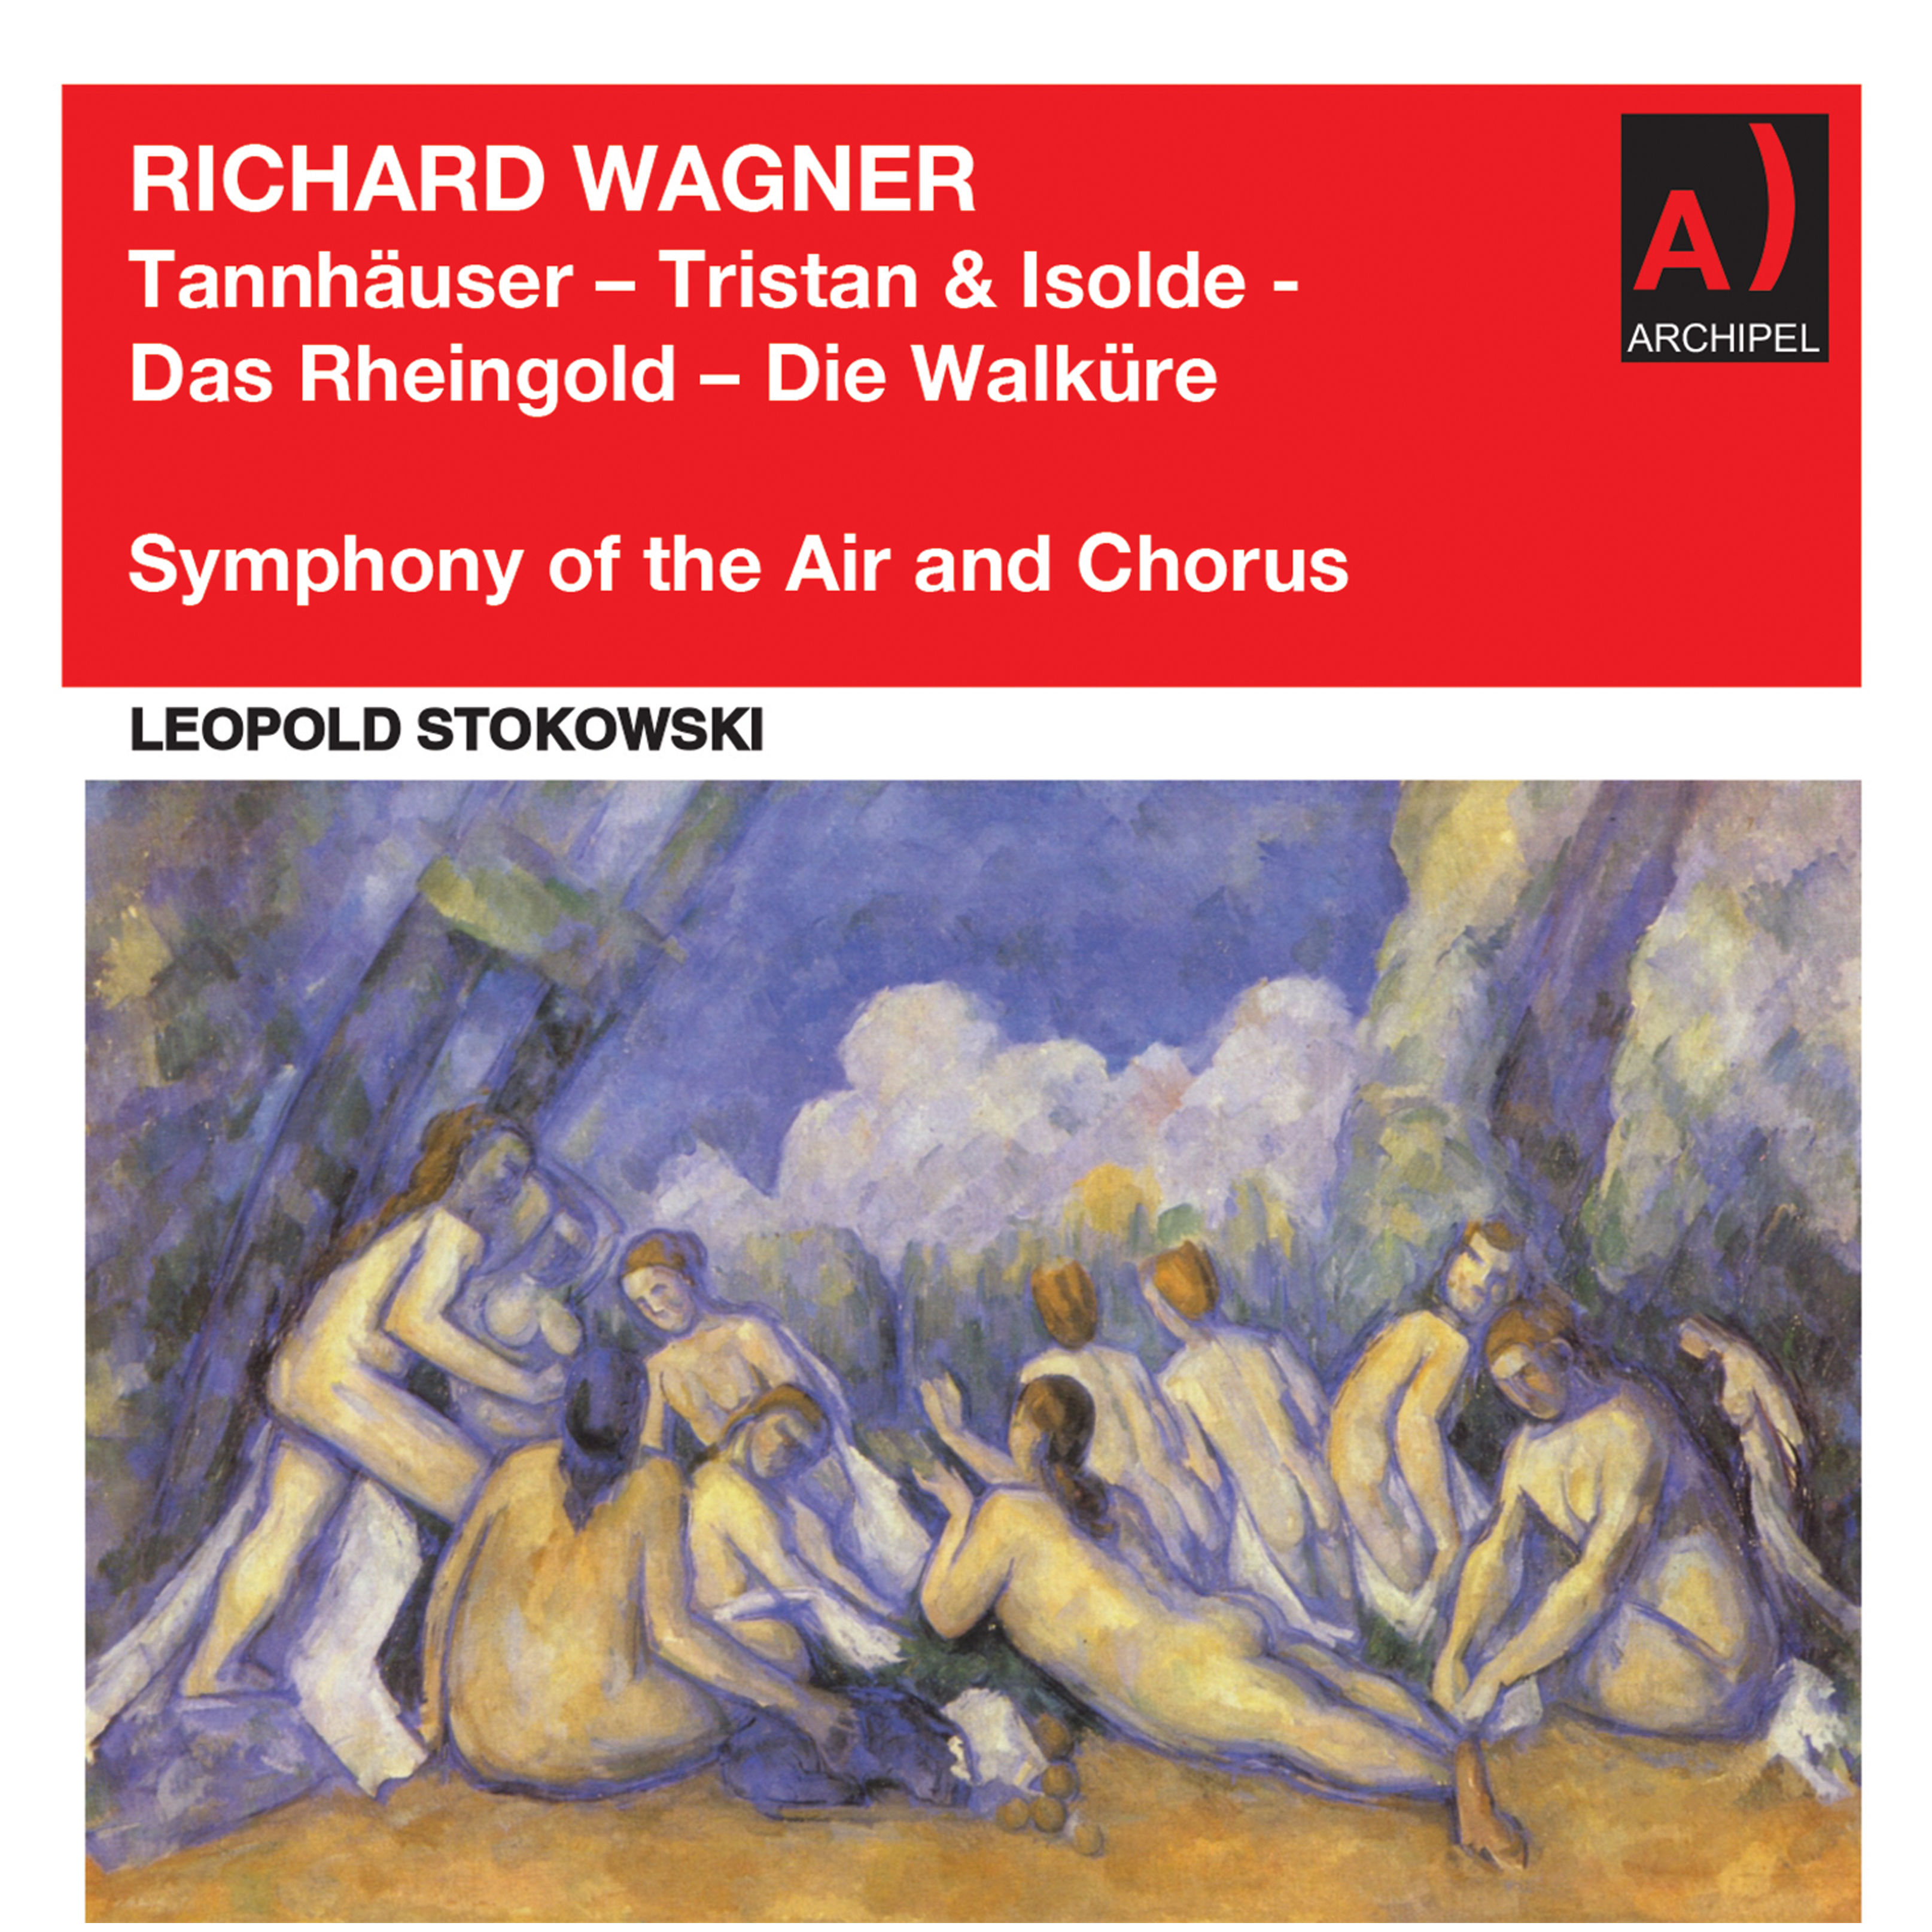 Symphony of the Air – Wagner: Orchestral Works (Remastered 2022) (1961/2022) [FLAC 24bit/96kHz]